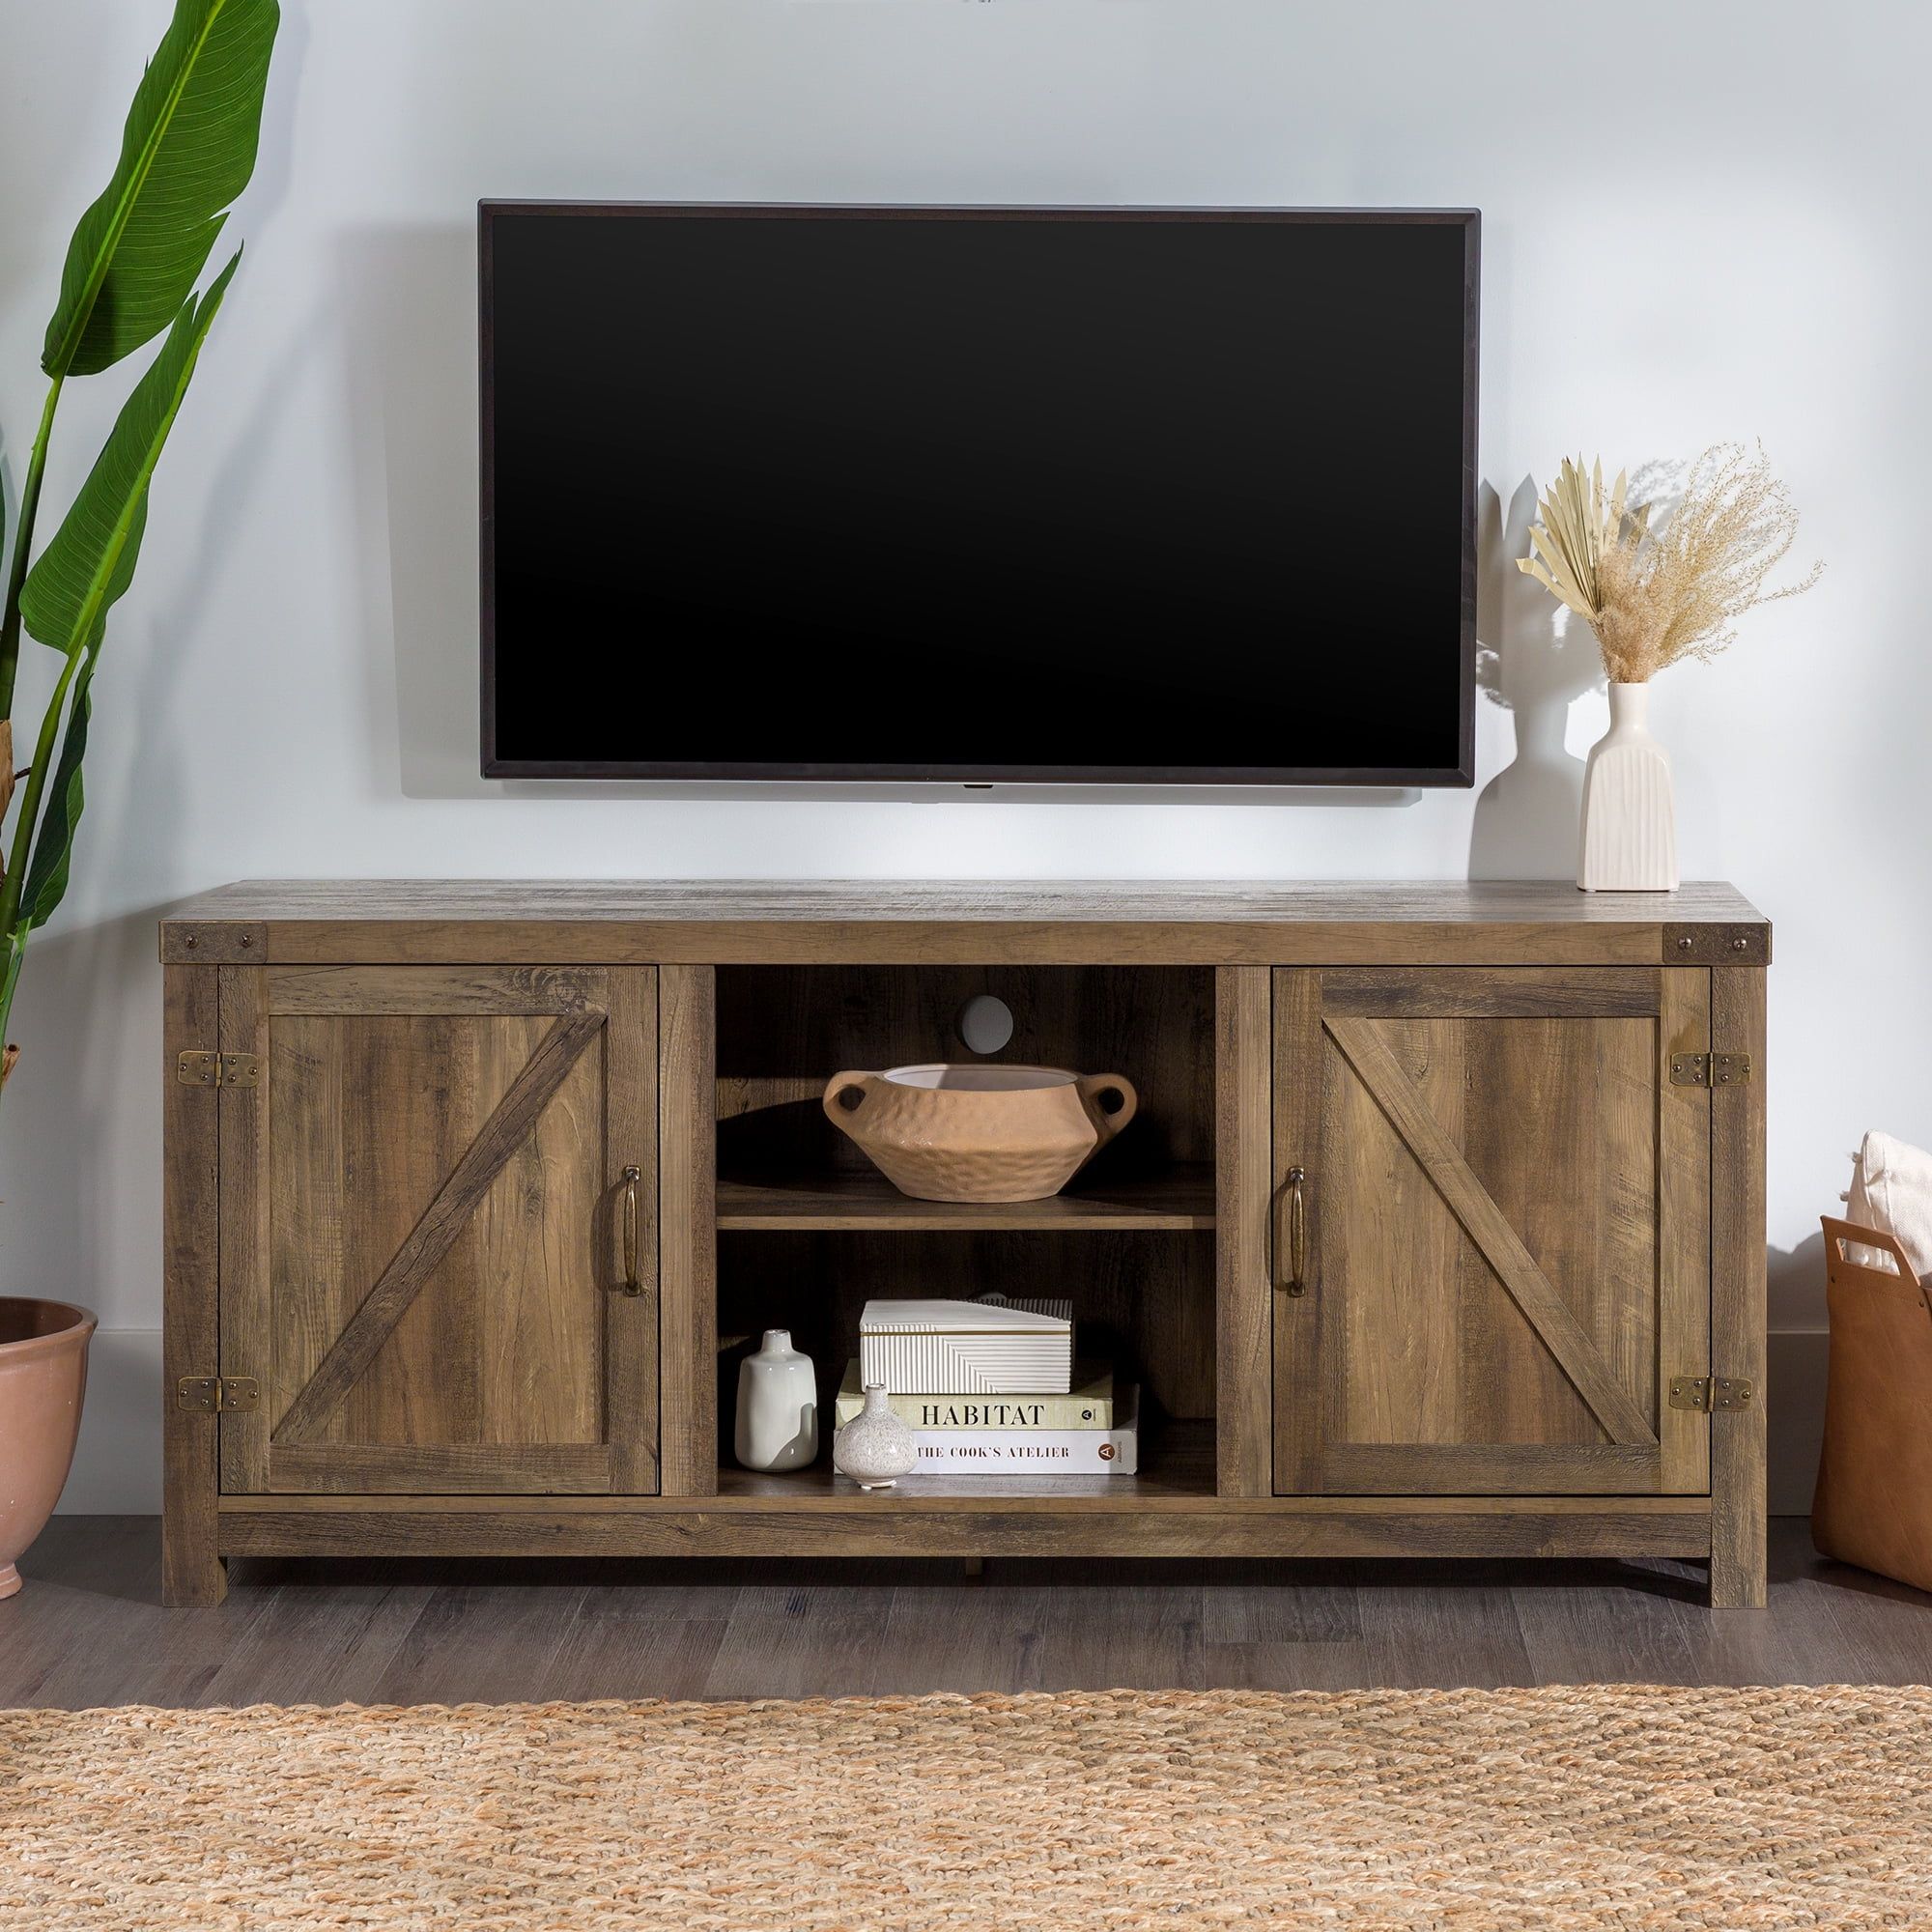 Woven Paths Modern Farmhouse Barn Door Tv Stand For Tvs Up To 65",  Reclaimed Barnwood – Walmart With Regard To Modern Farmhouse Barn Tv Stands (Photo 3 of 15)